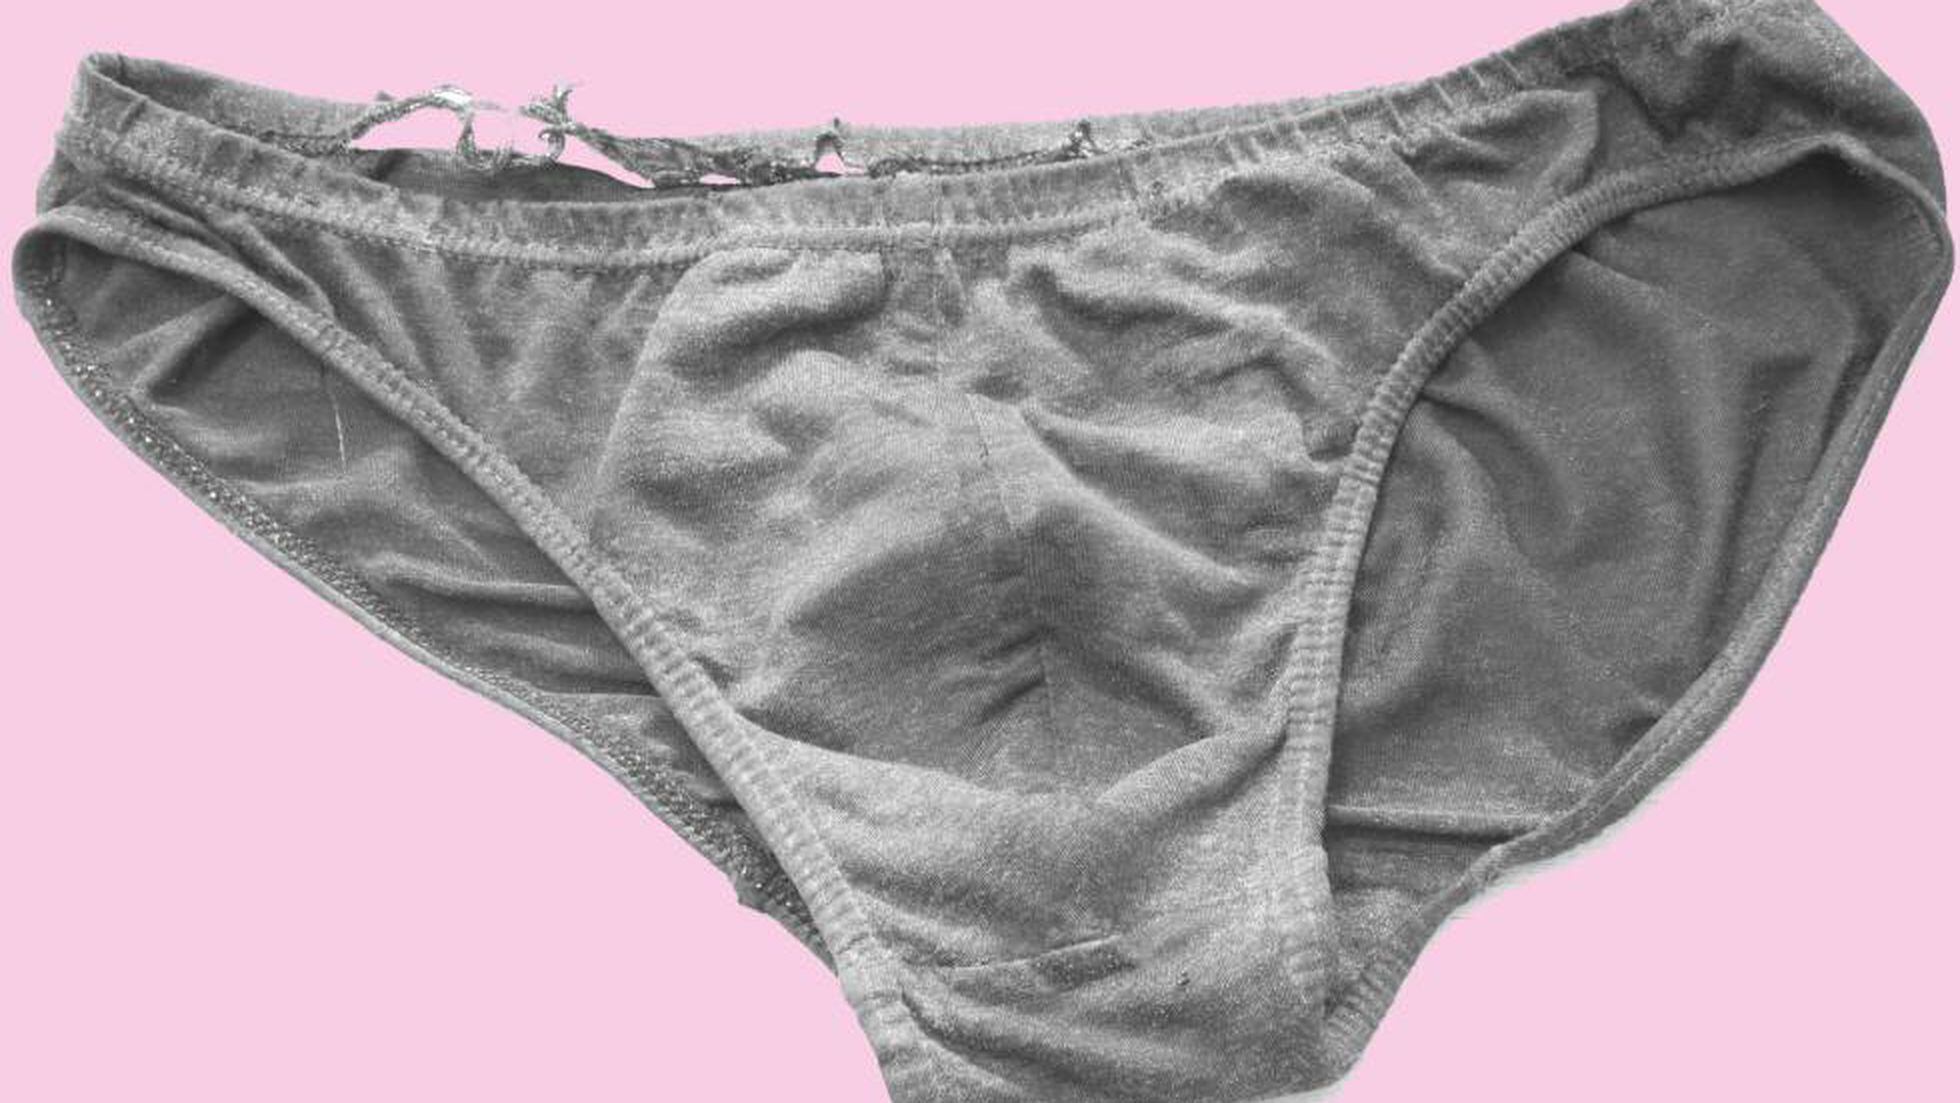 How come some guys like to wear panties? - Quora